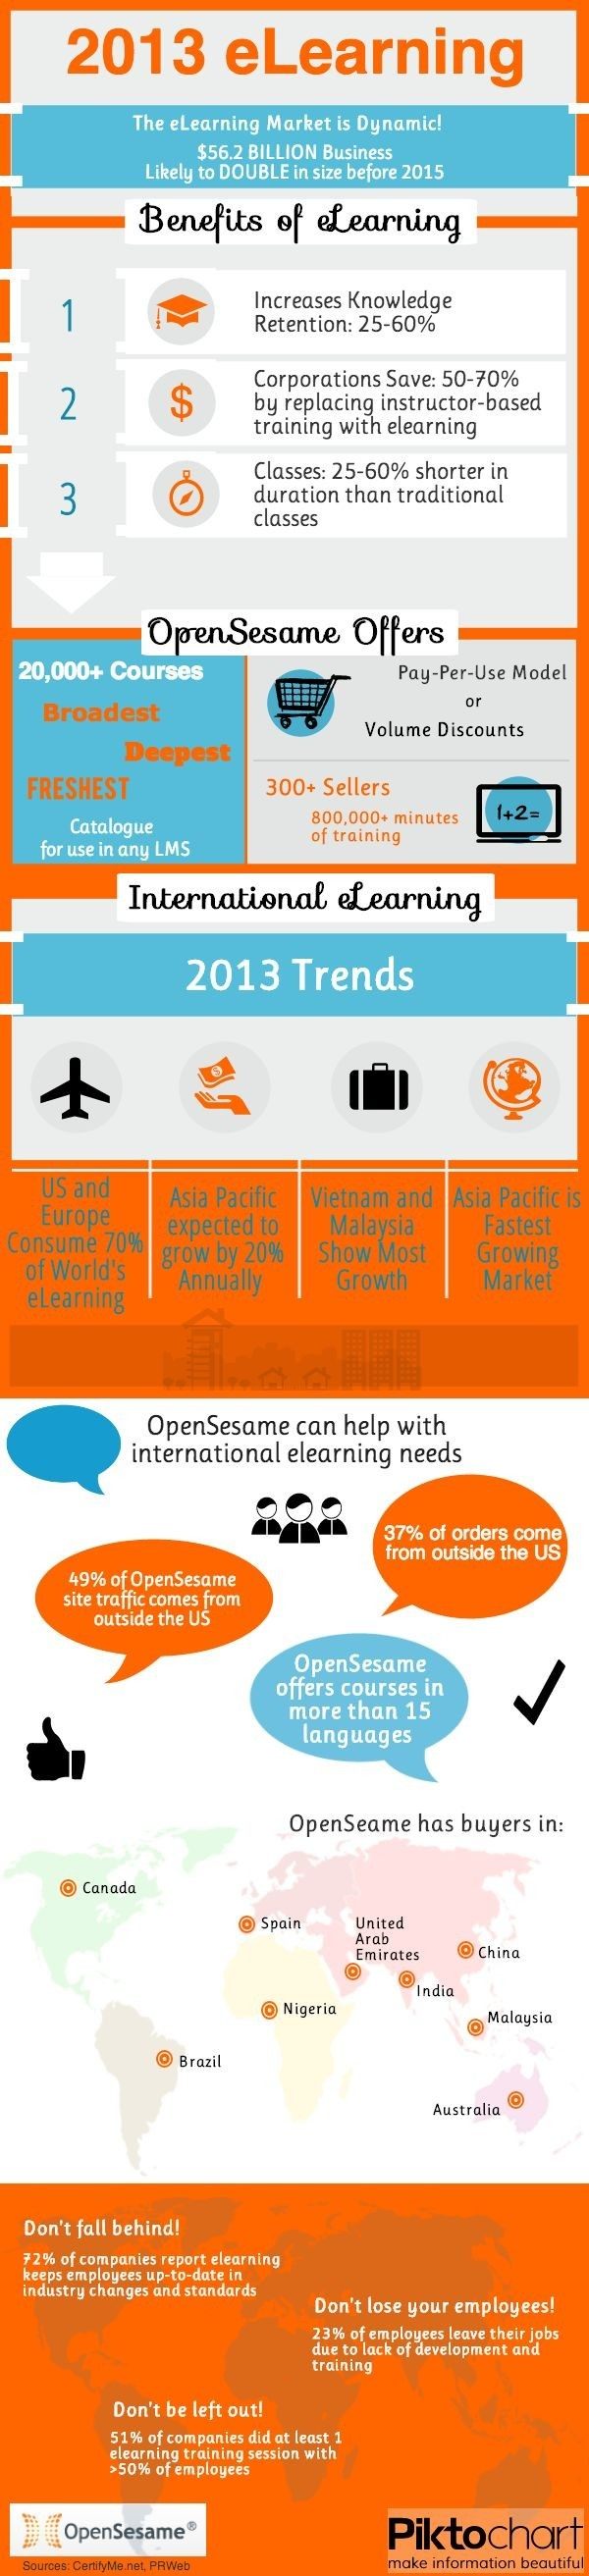 eLearning Industry Trends 2013 Infographic thumbnail